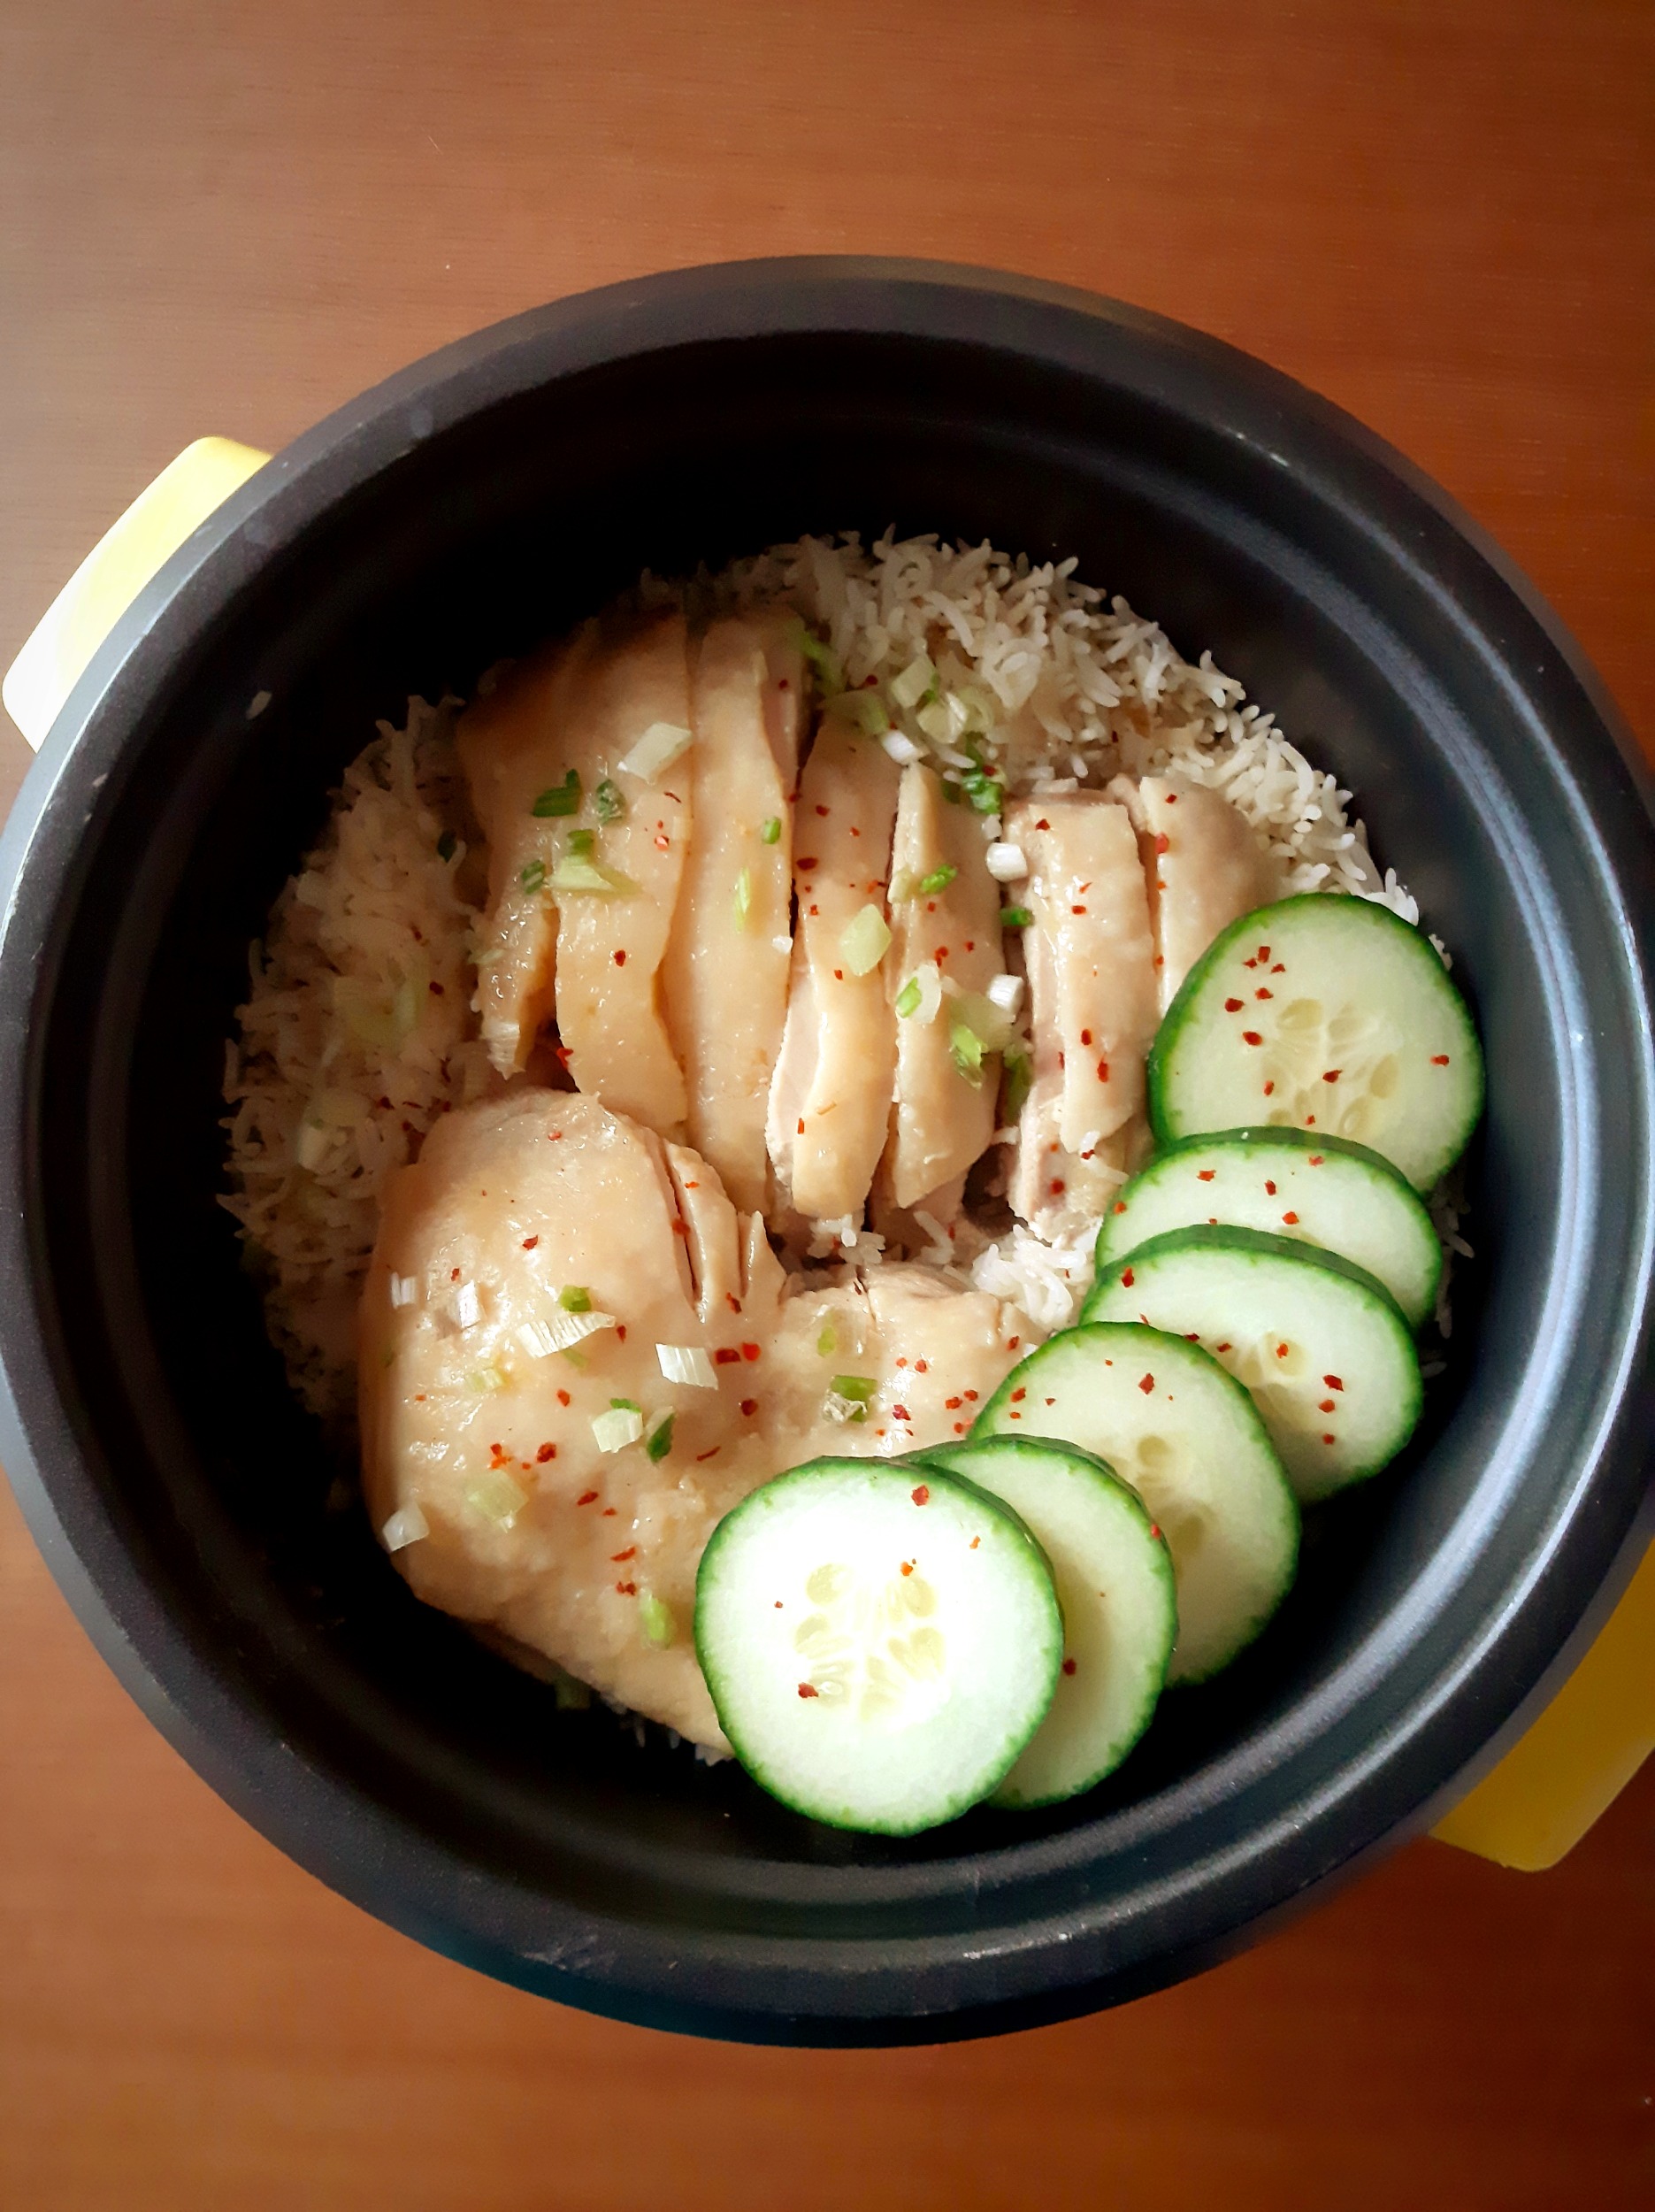 Hainanese Chicken Rice - ricecooker one-pot meal! | Belated Brewery